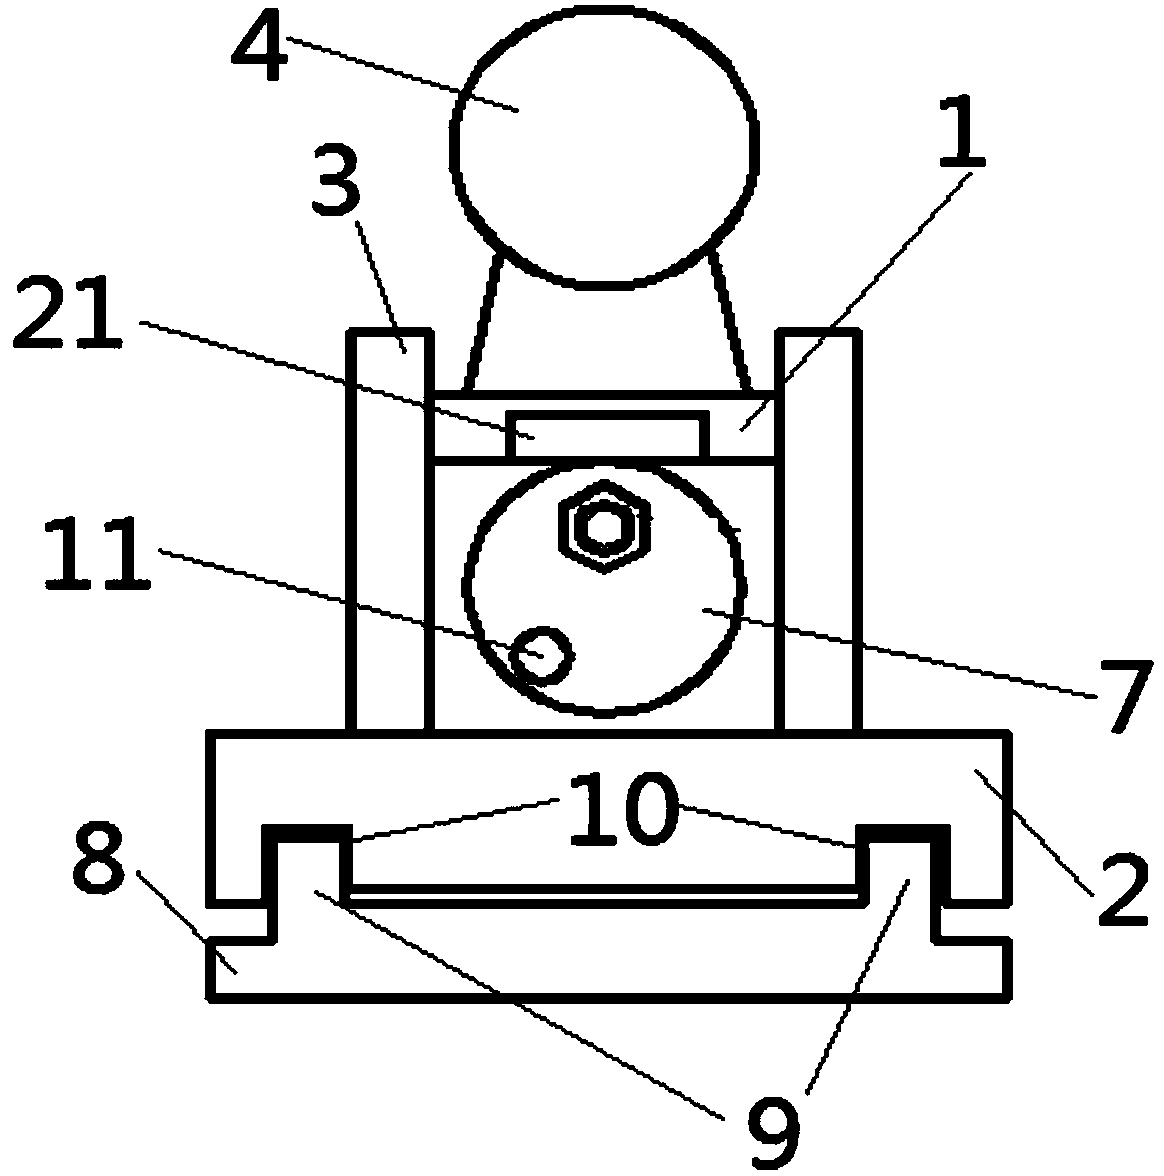 A device for deburring inner holes of shaft sleeve parts